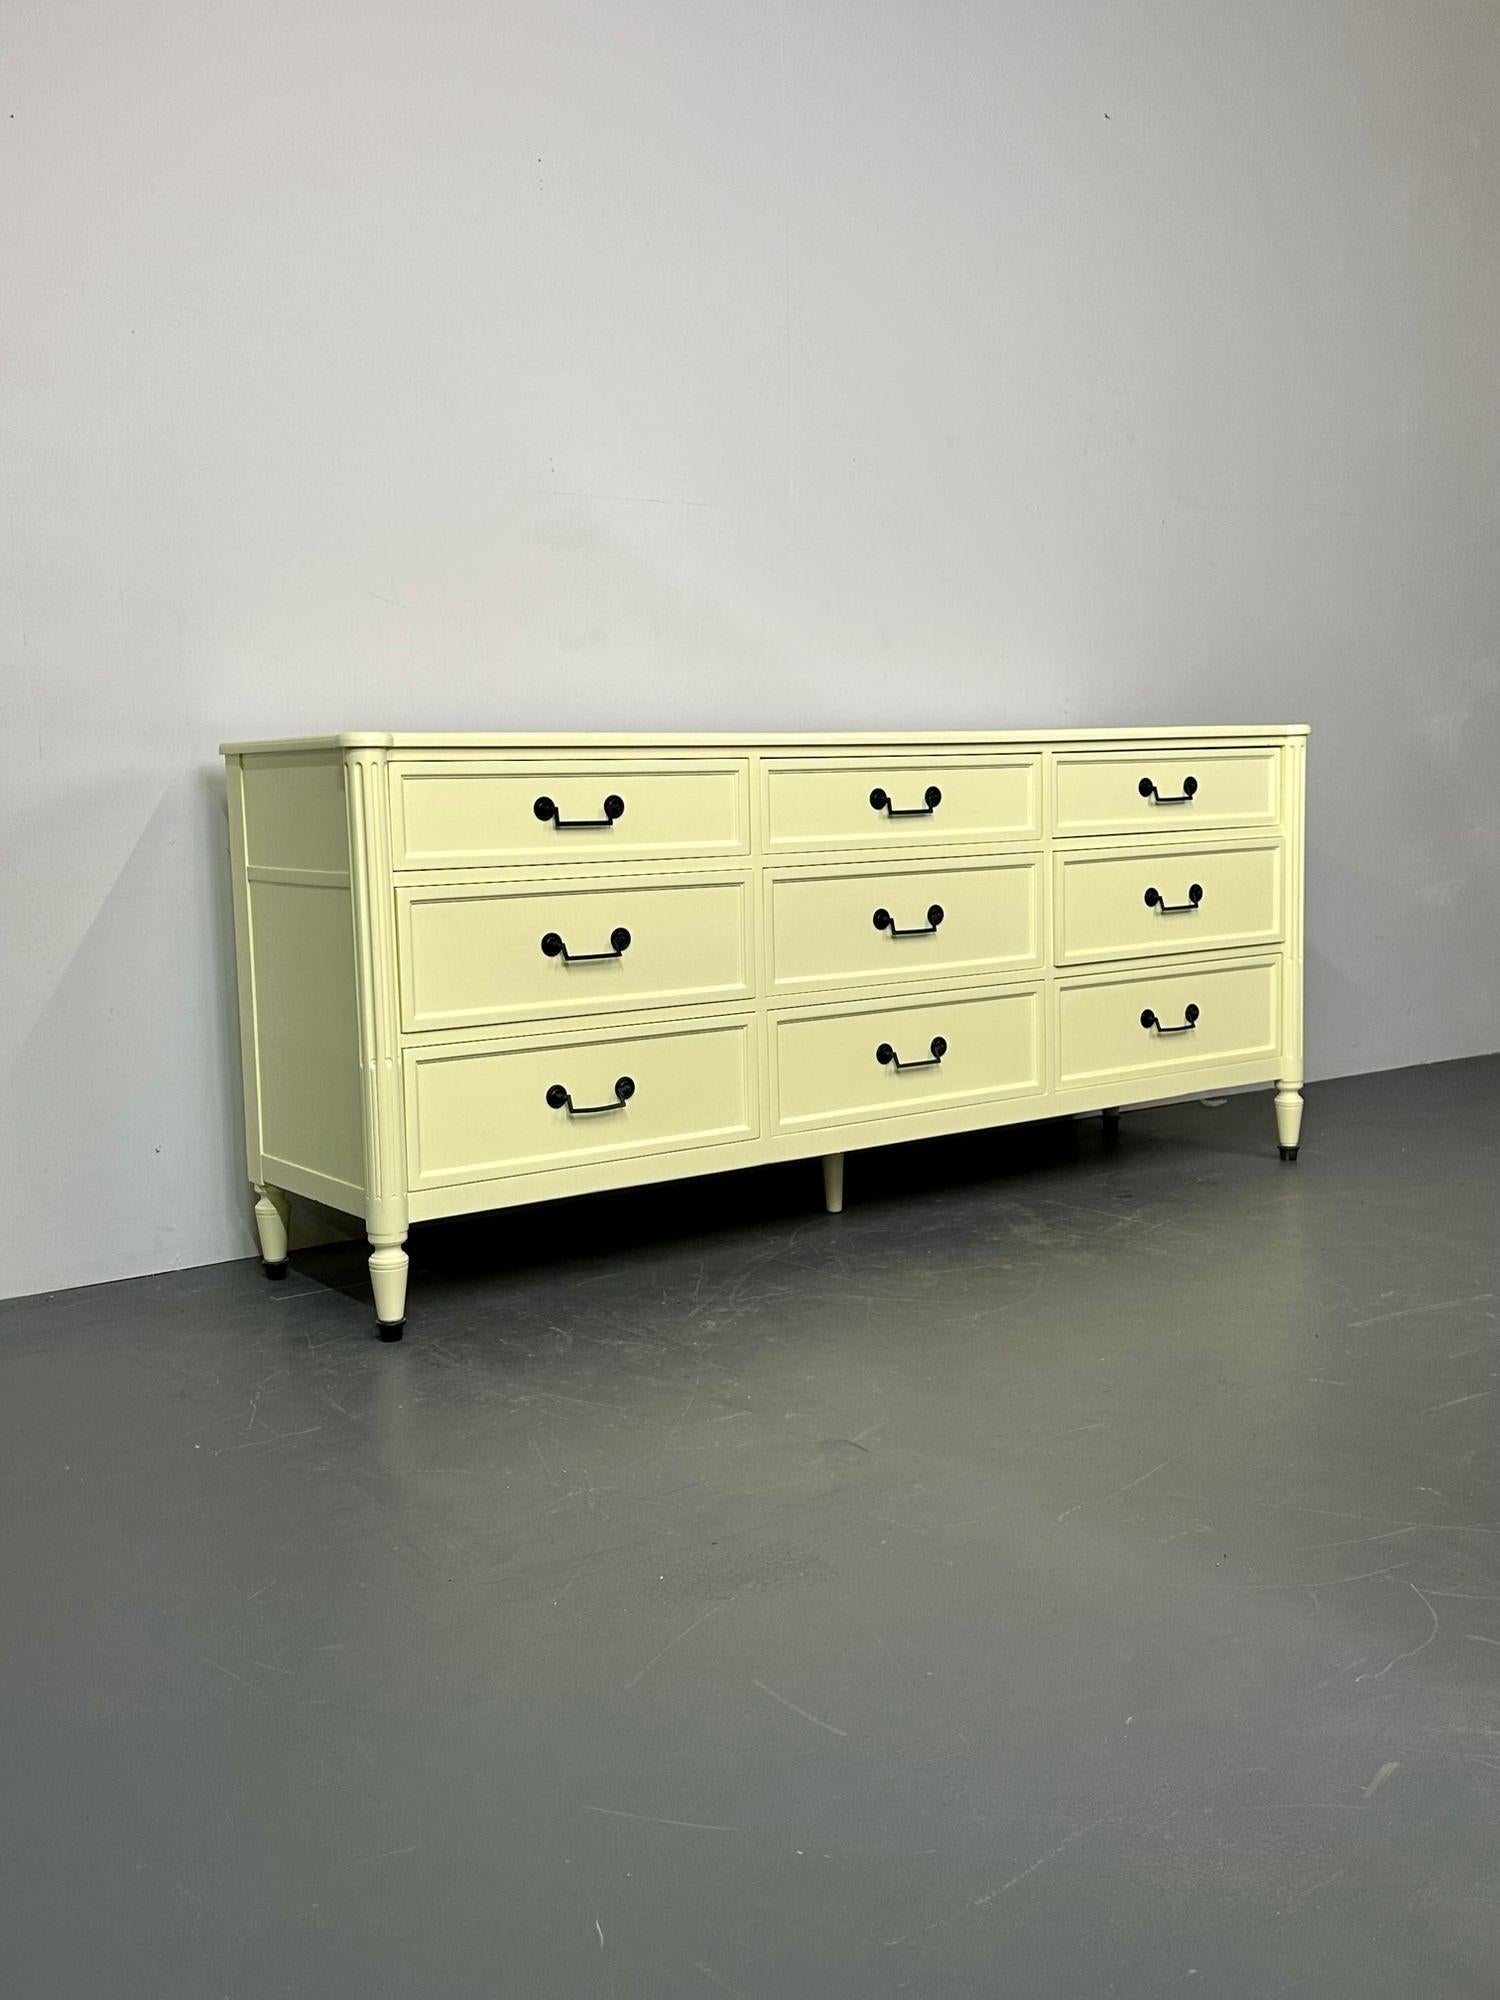 Celadon Green Dresser / Sideboard by Baker, Brass Handles, Refinished, Regency In Good Condition For Sale In Stamford, CT